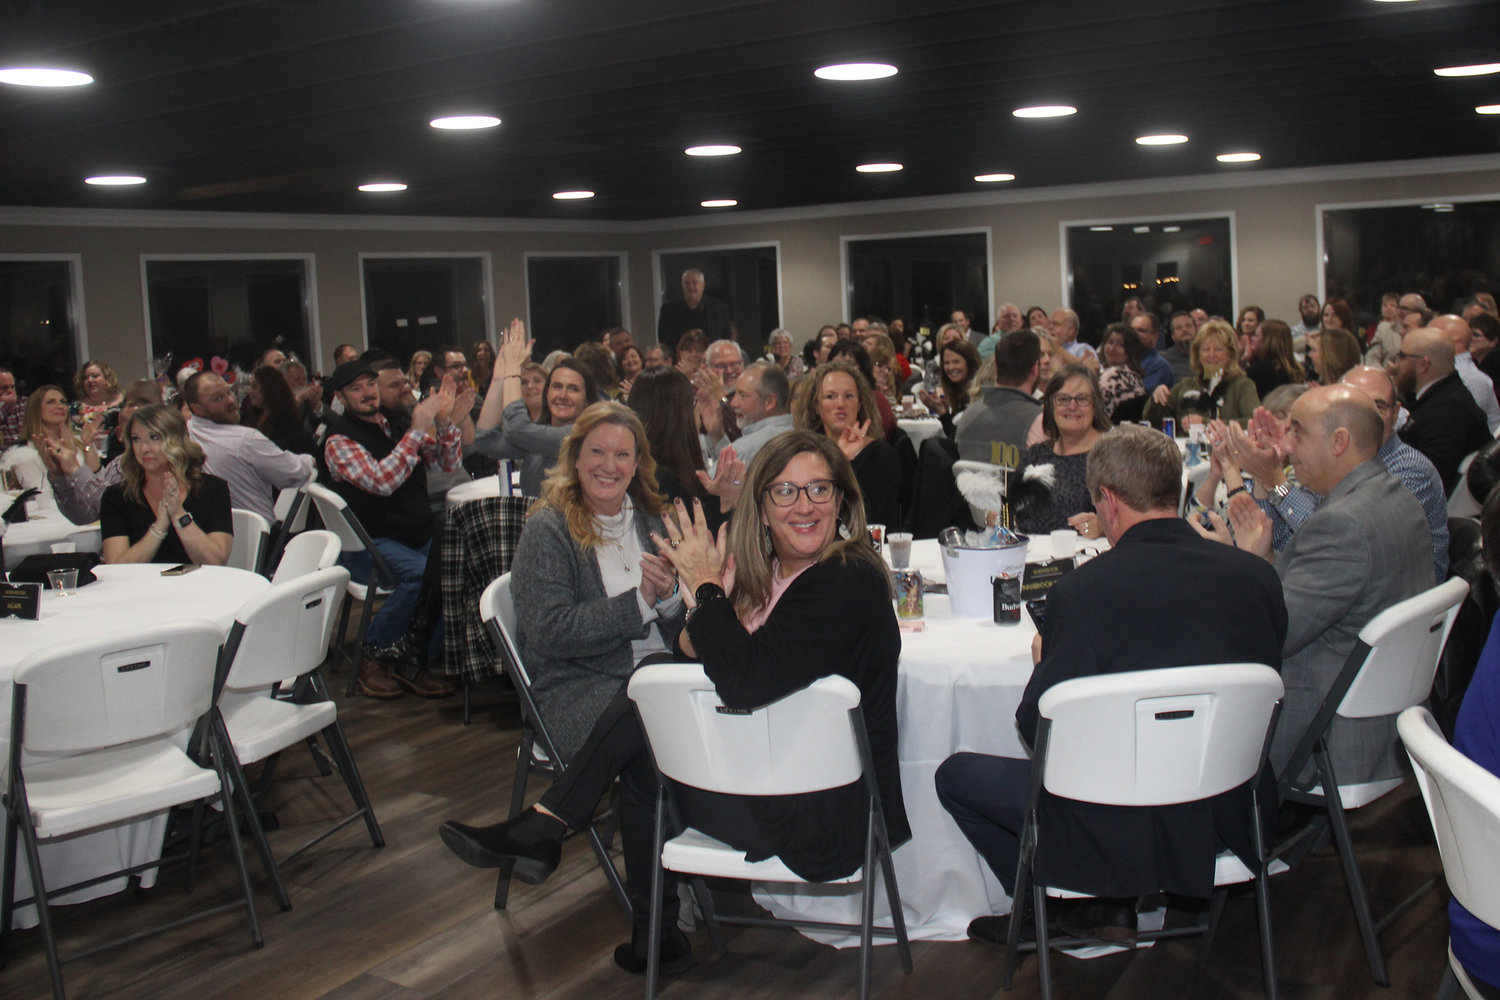 CHEERS FOR CHAMBER — Members of the Warrenton Area Chamber of Commerce, gathered for the Chamber’s 100th anniversary banquet Jan. 13, applaud during recognitions of the Chamber’s important contributors.